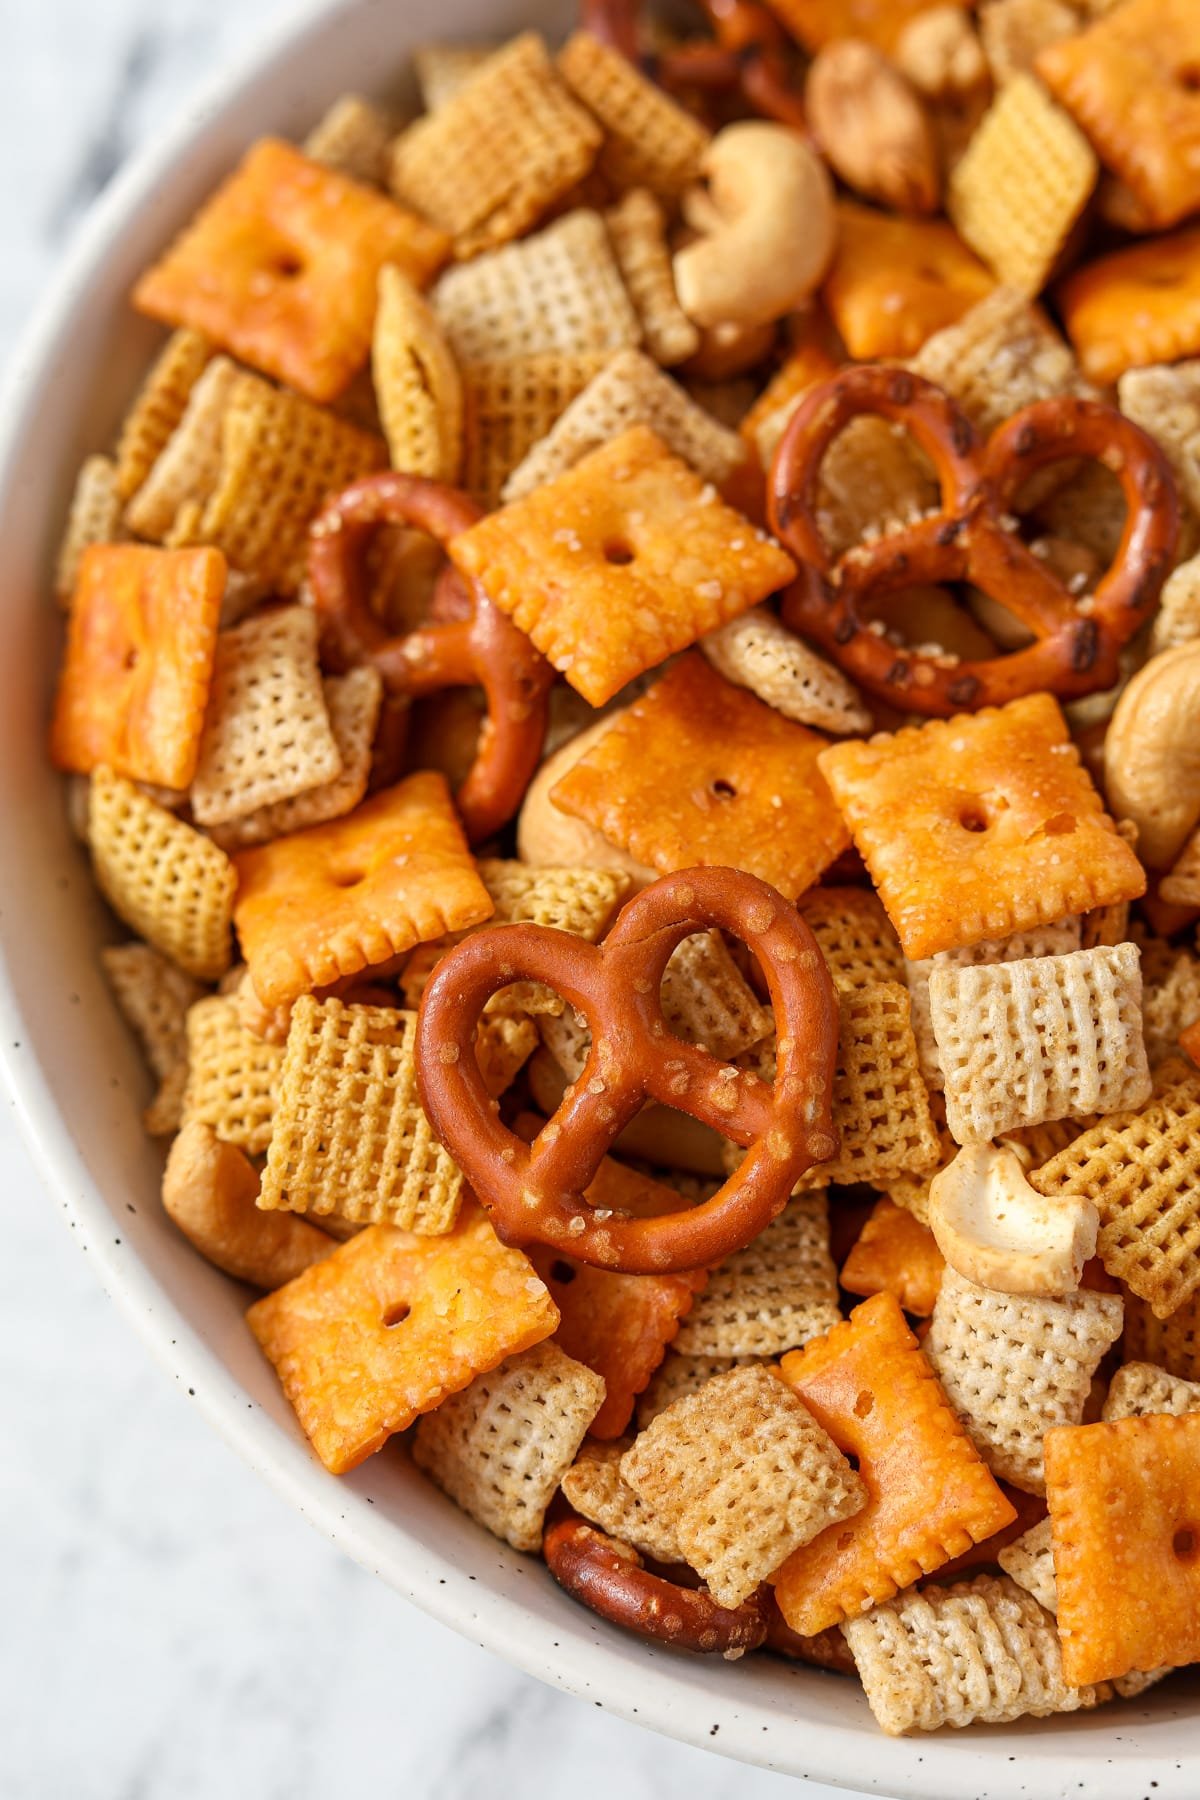 A bowl of Chex Mix with pretzels, cereal, nuts, and cheese crackers.